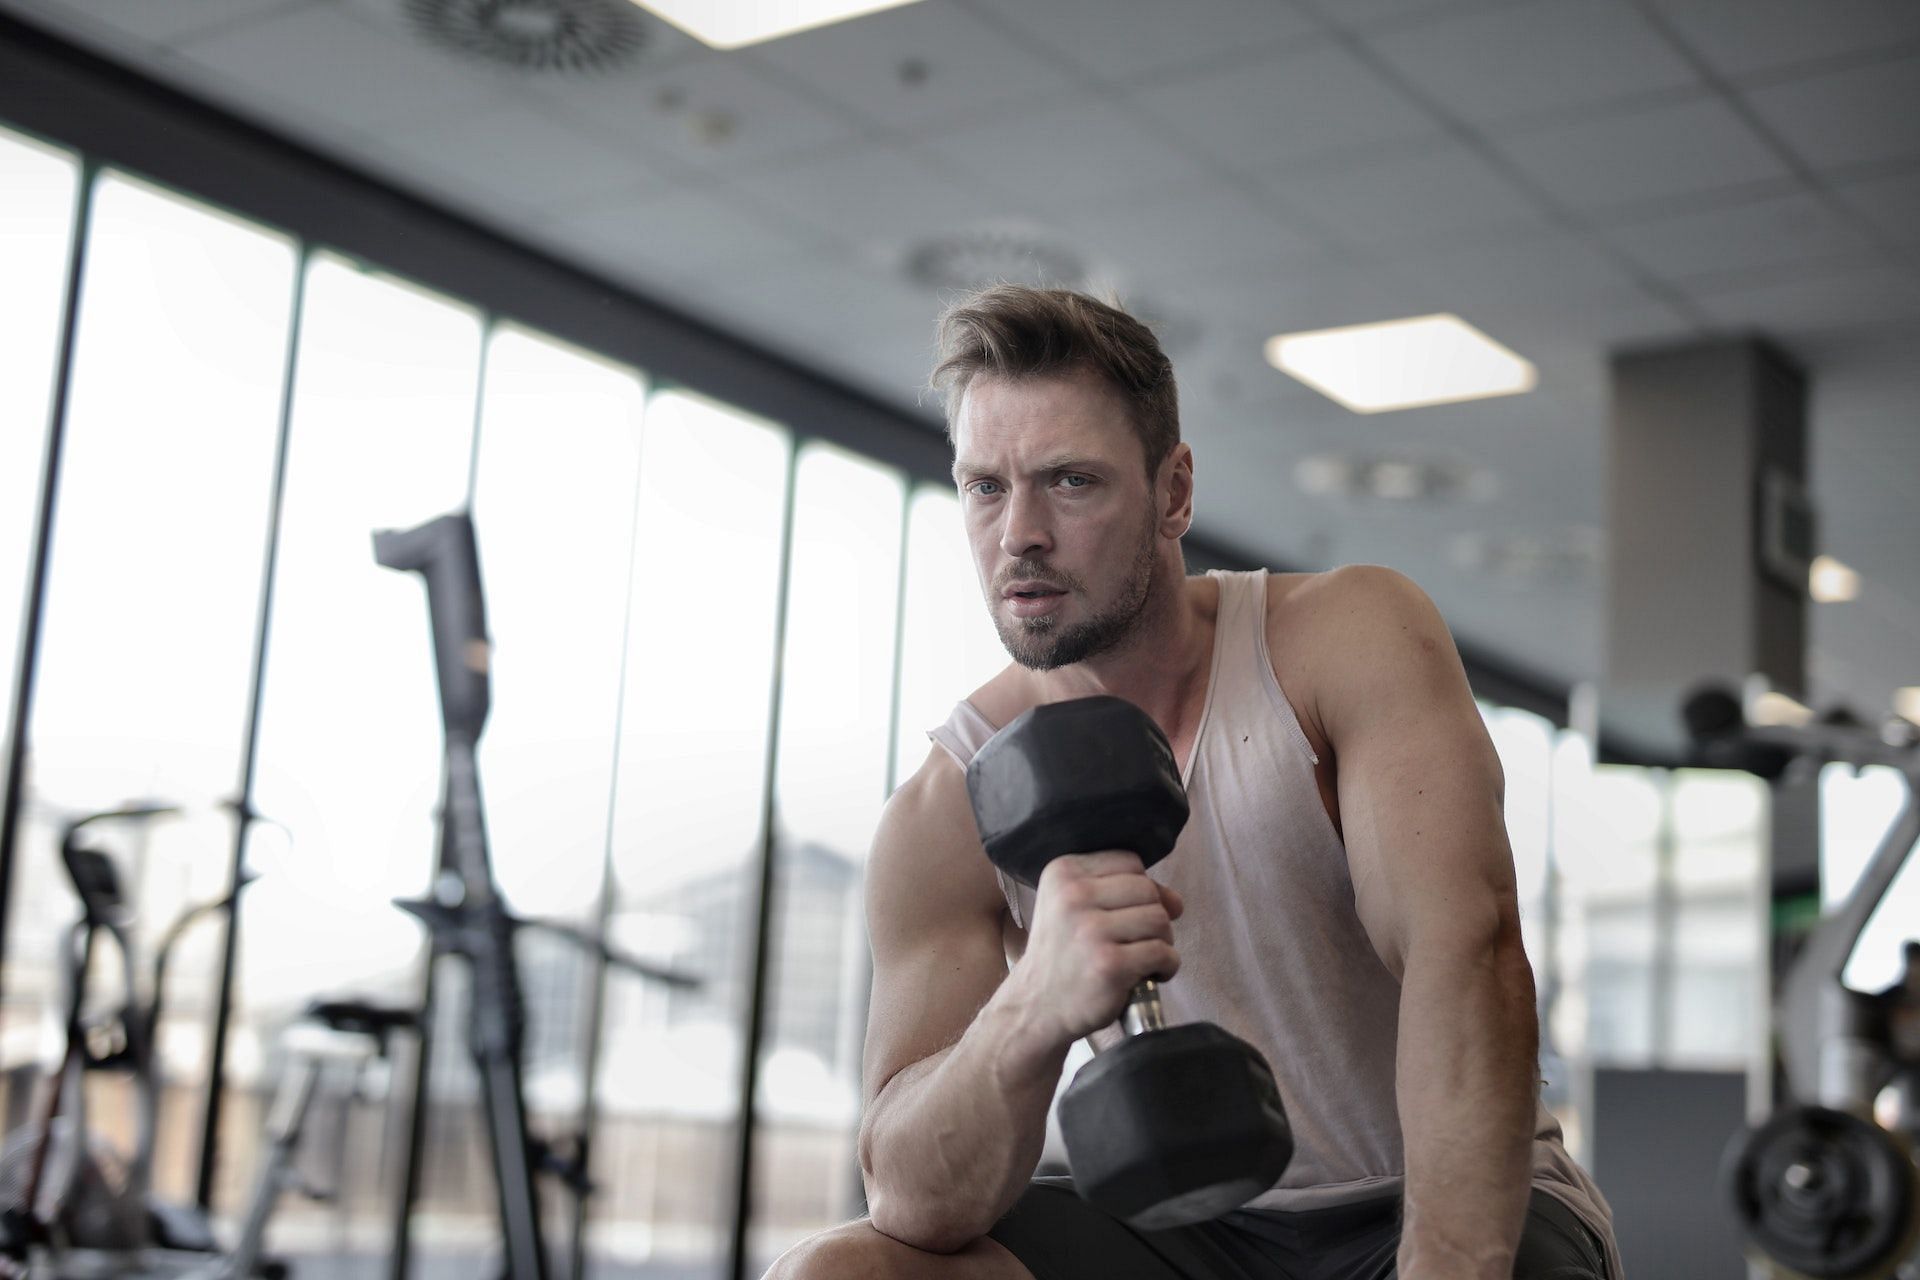 Training your forearms is incredibly important. (Photo via Pexels/Andrea Piacquadio)